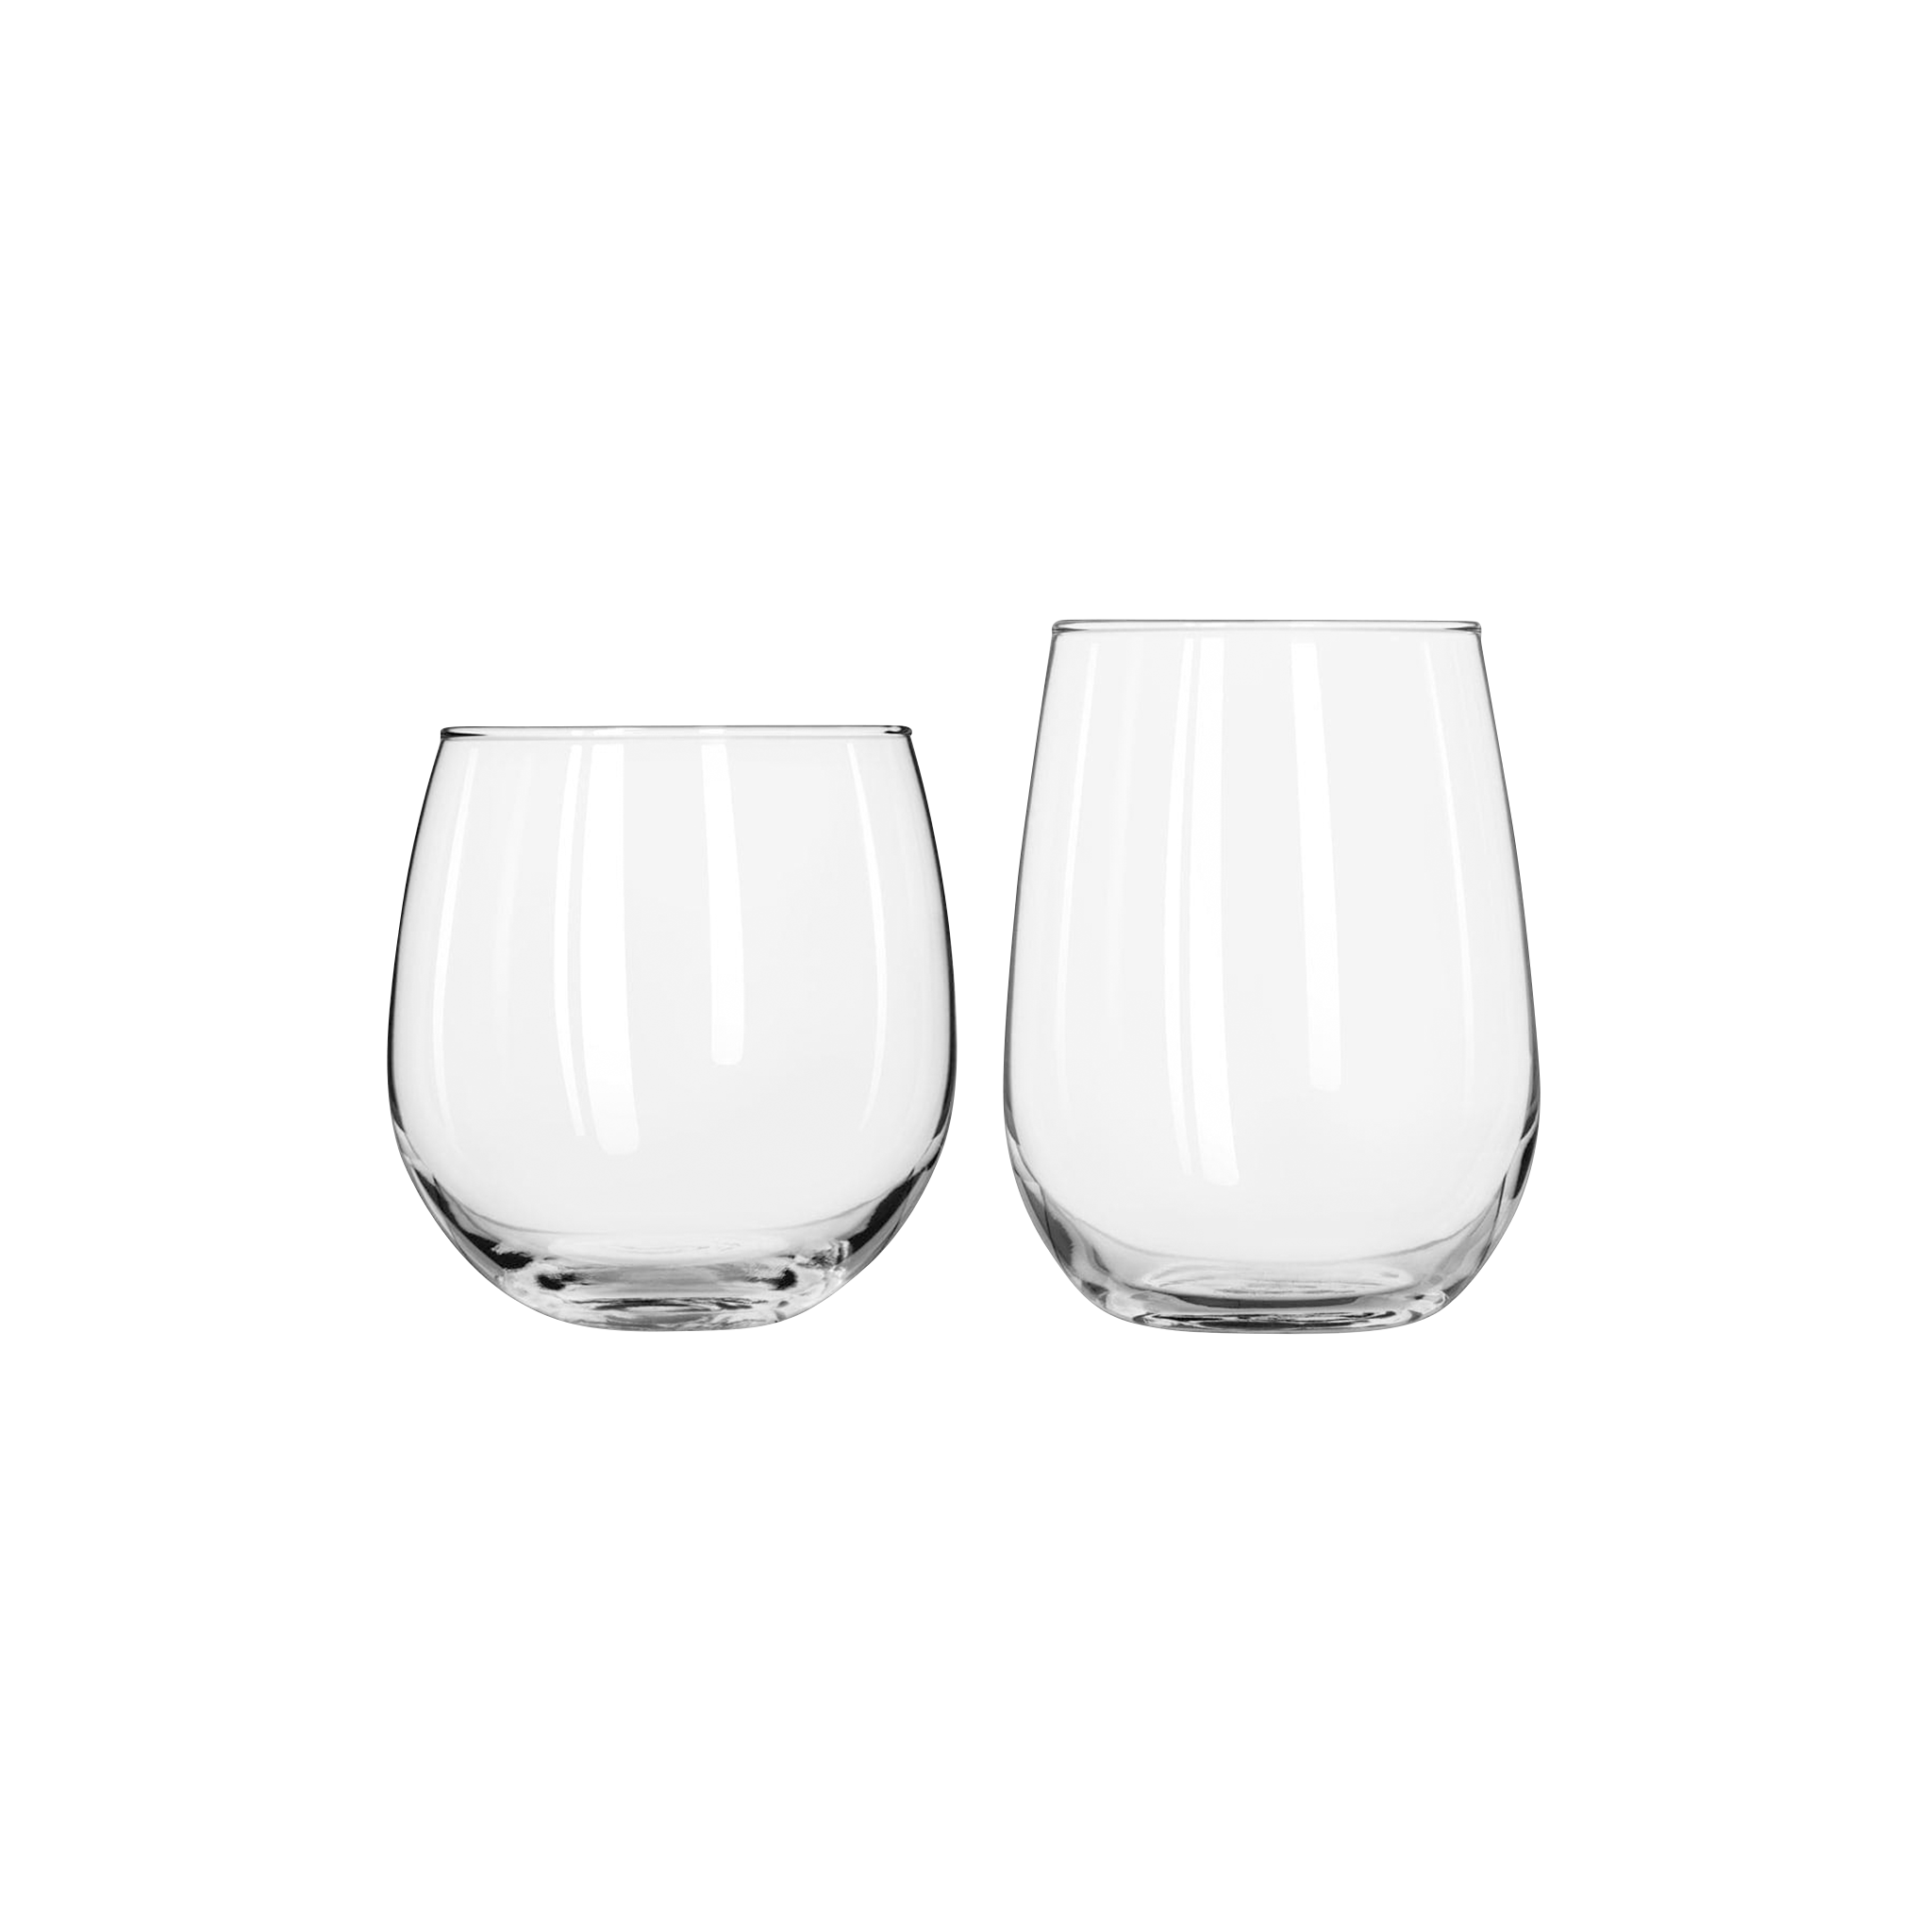 Libbey Stemless Wine Glasses - 12 Pack Variety